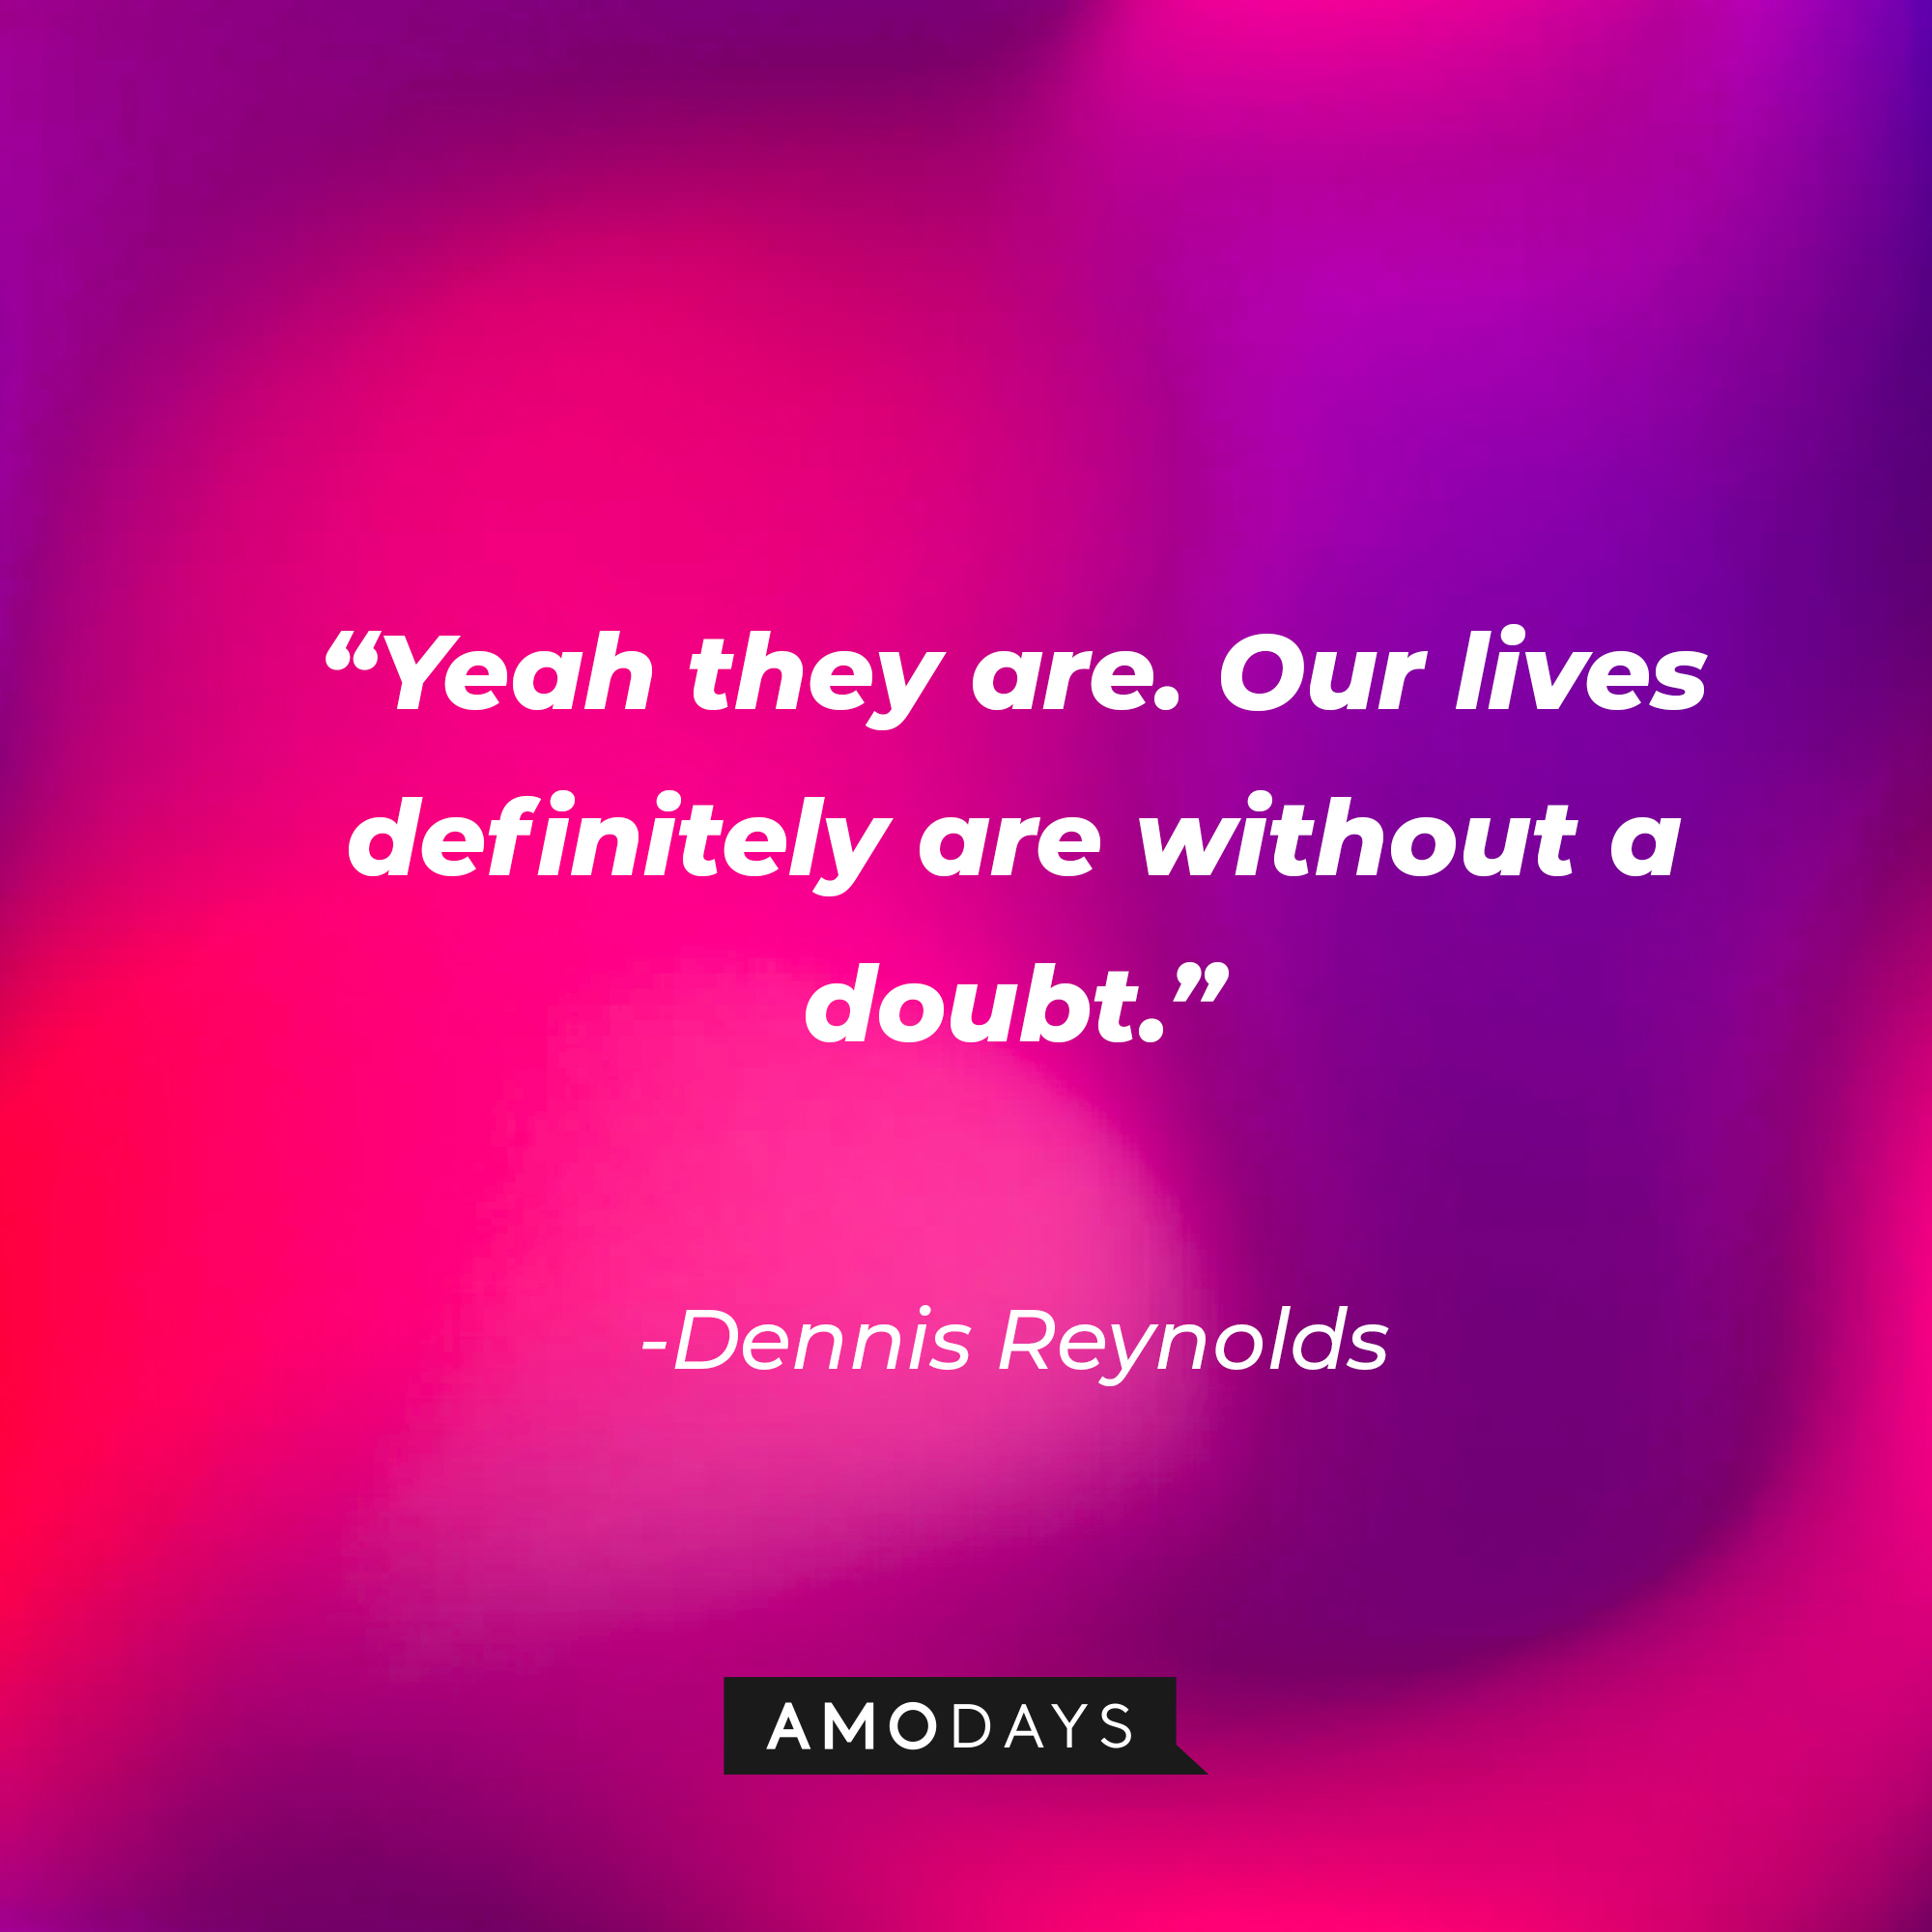 Dennis Reynolds’ quote:  “Yeah they are. Our lives definitely are without a doubt.” | Source: AmoDays